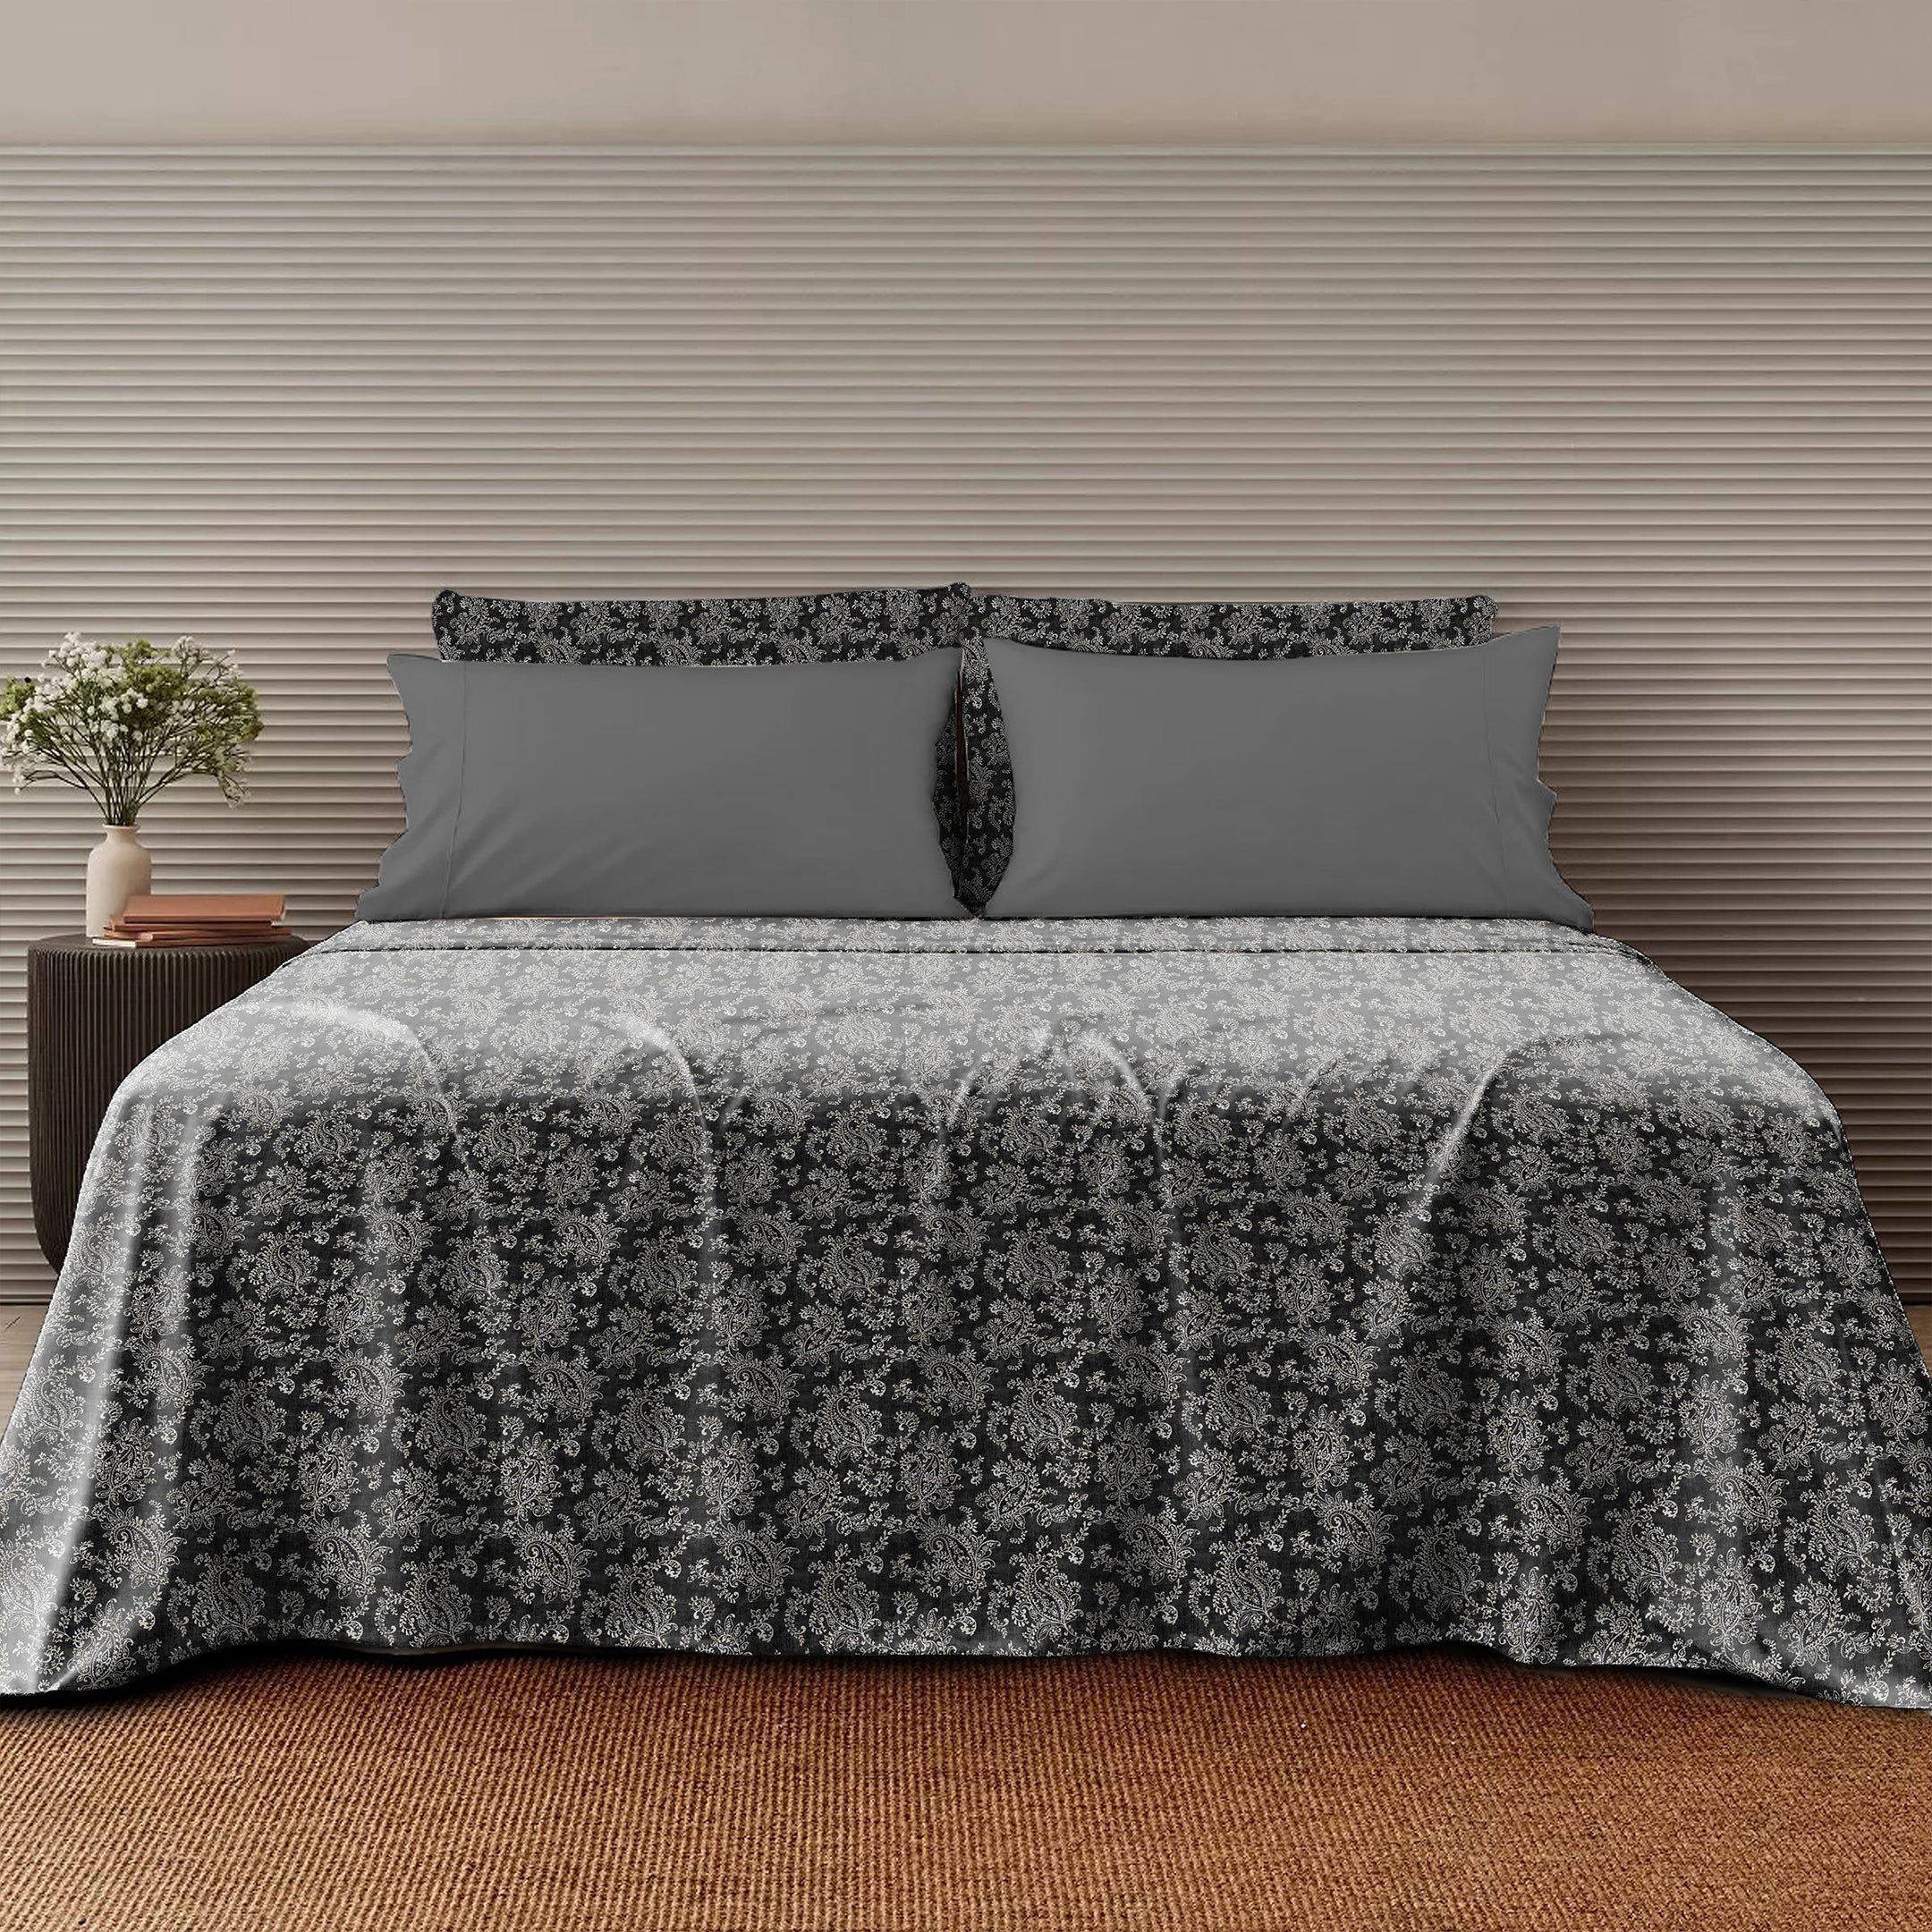 Jodhpur Flowers Bedsheet for Double Bed with 2 PillowCovers King Size (104" X 90") Black